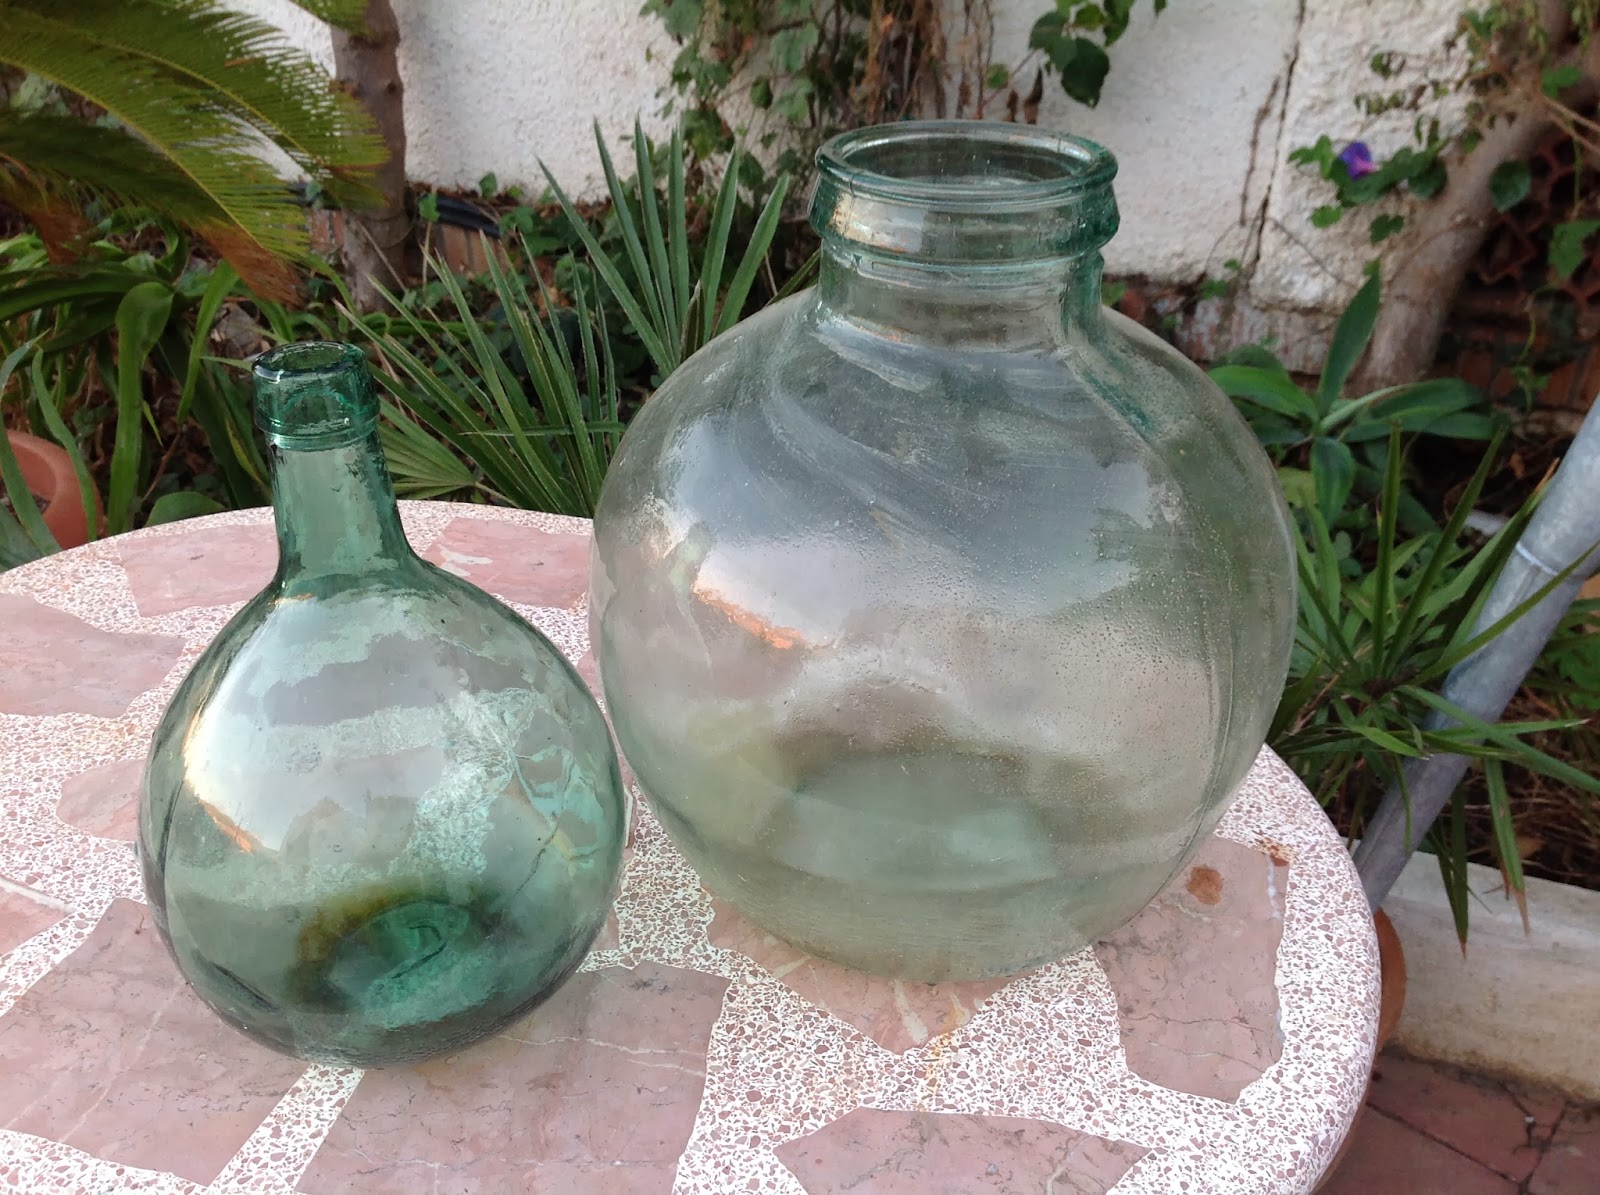 Digame: For Sale 2 glass bottles